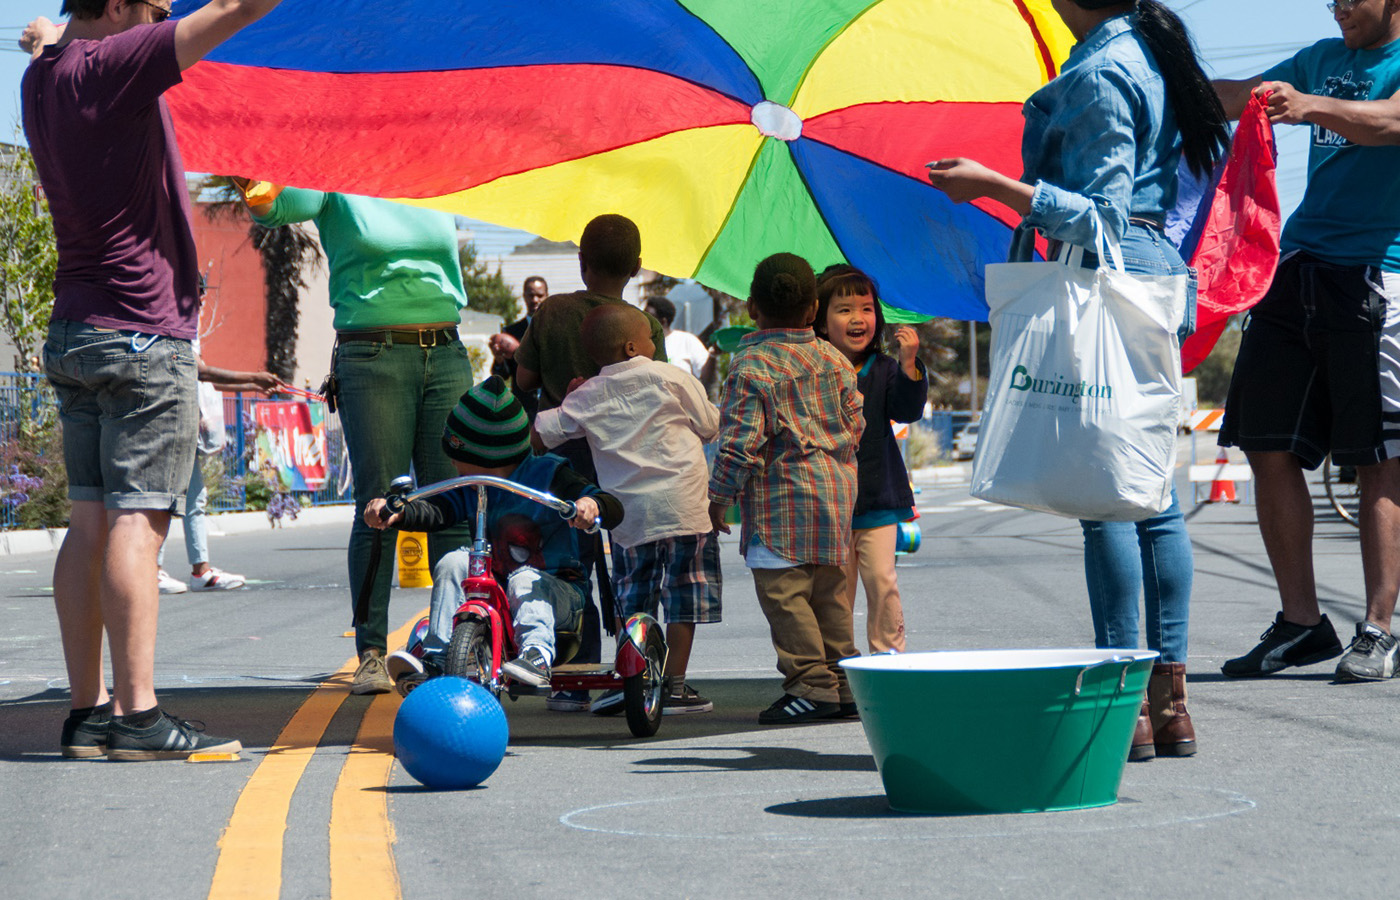 Image of families playing in the street. Photo Credit: SFMTA Photo.